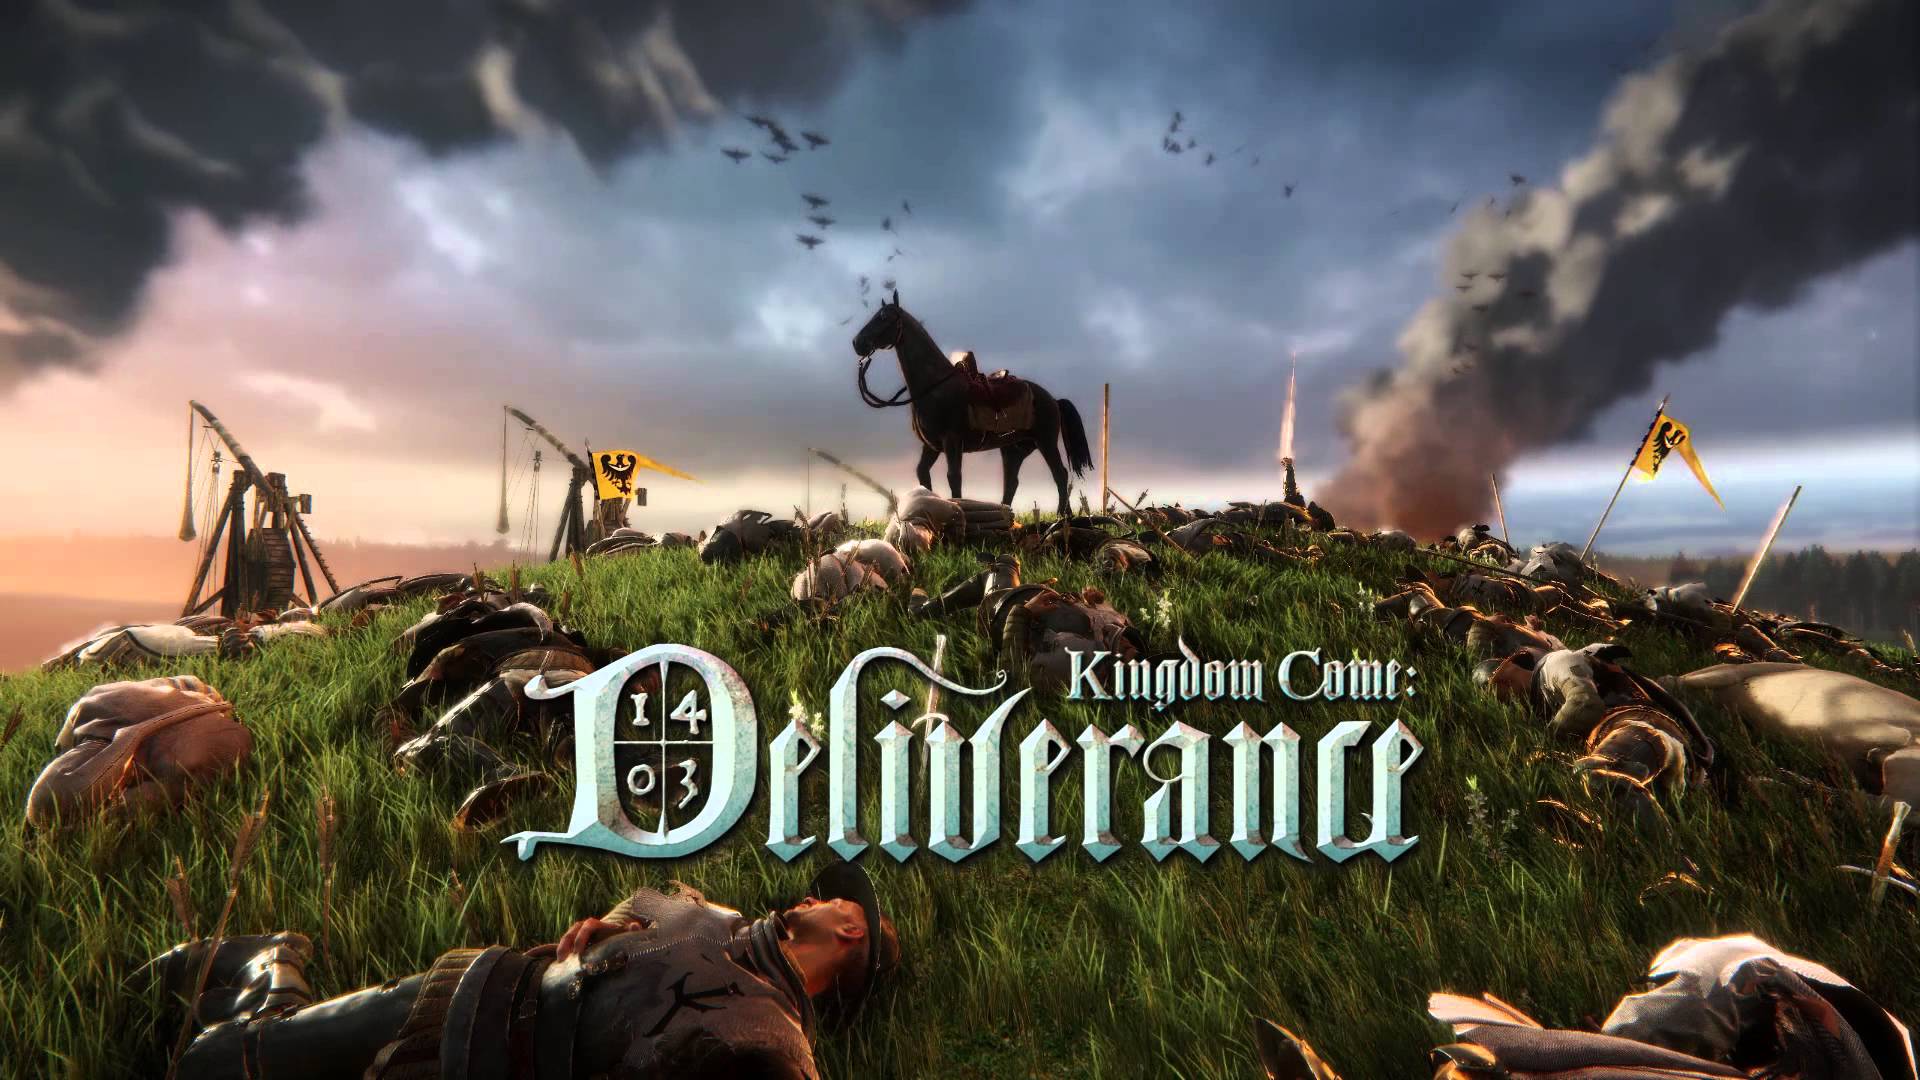 Why Kingdom Come: Deliverance is Set to Take 2018 by Storm